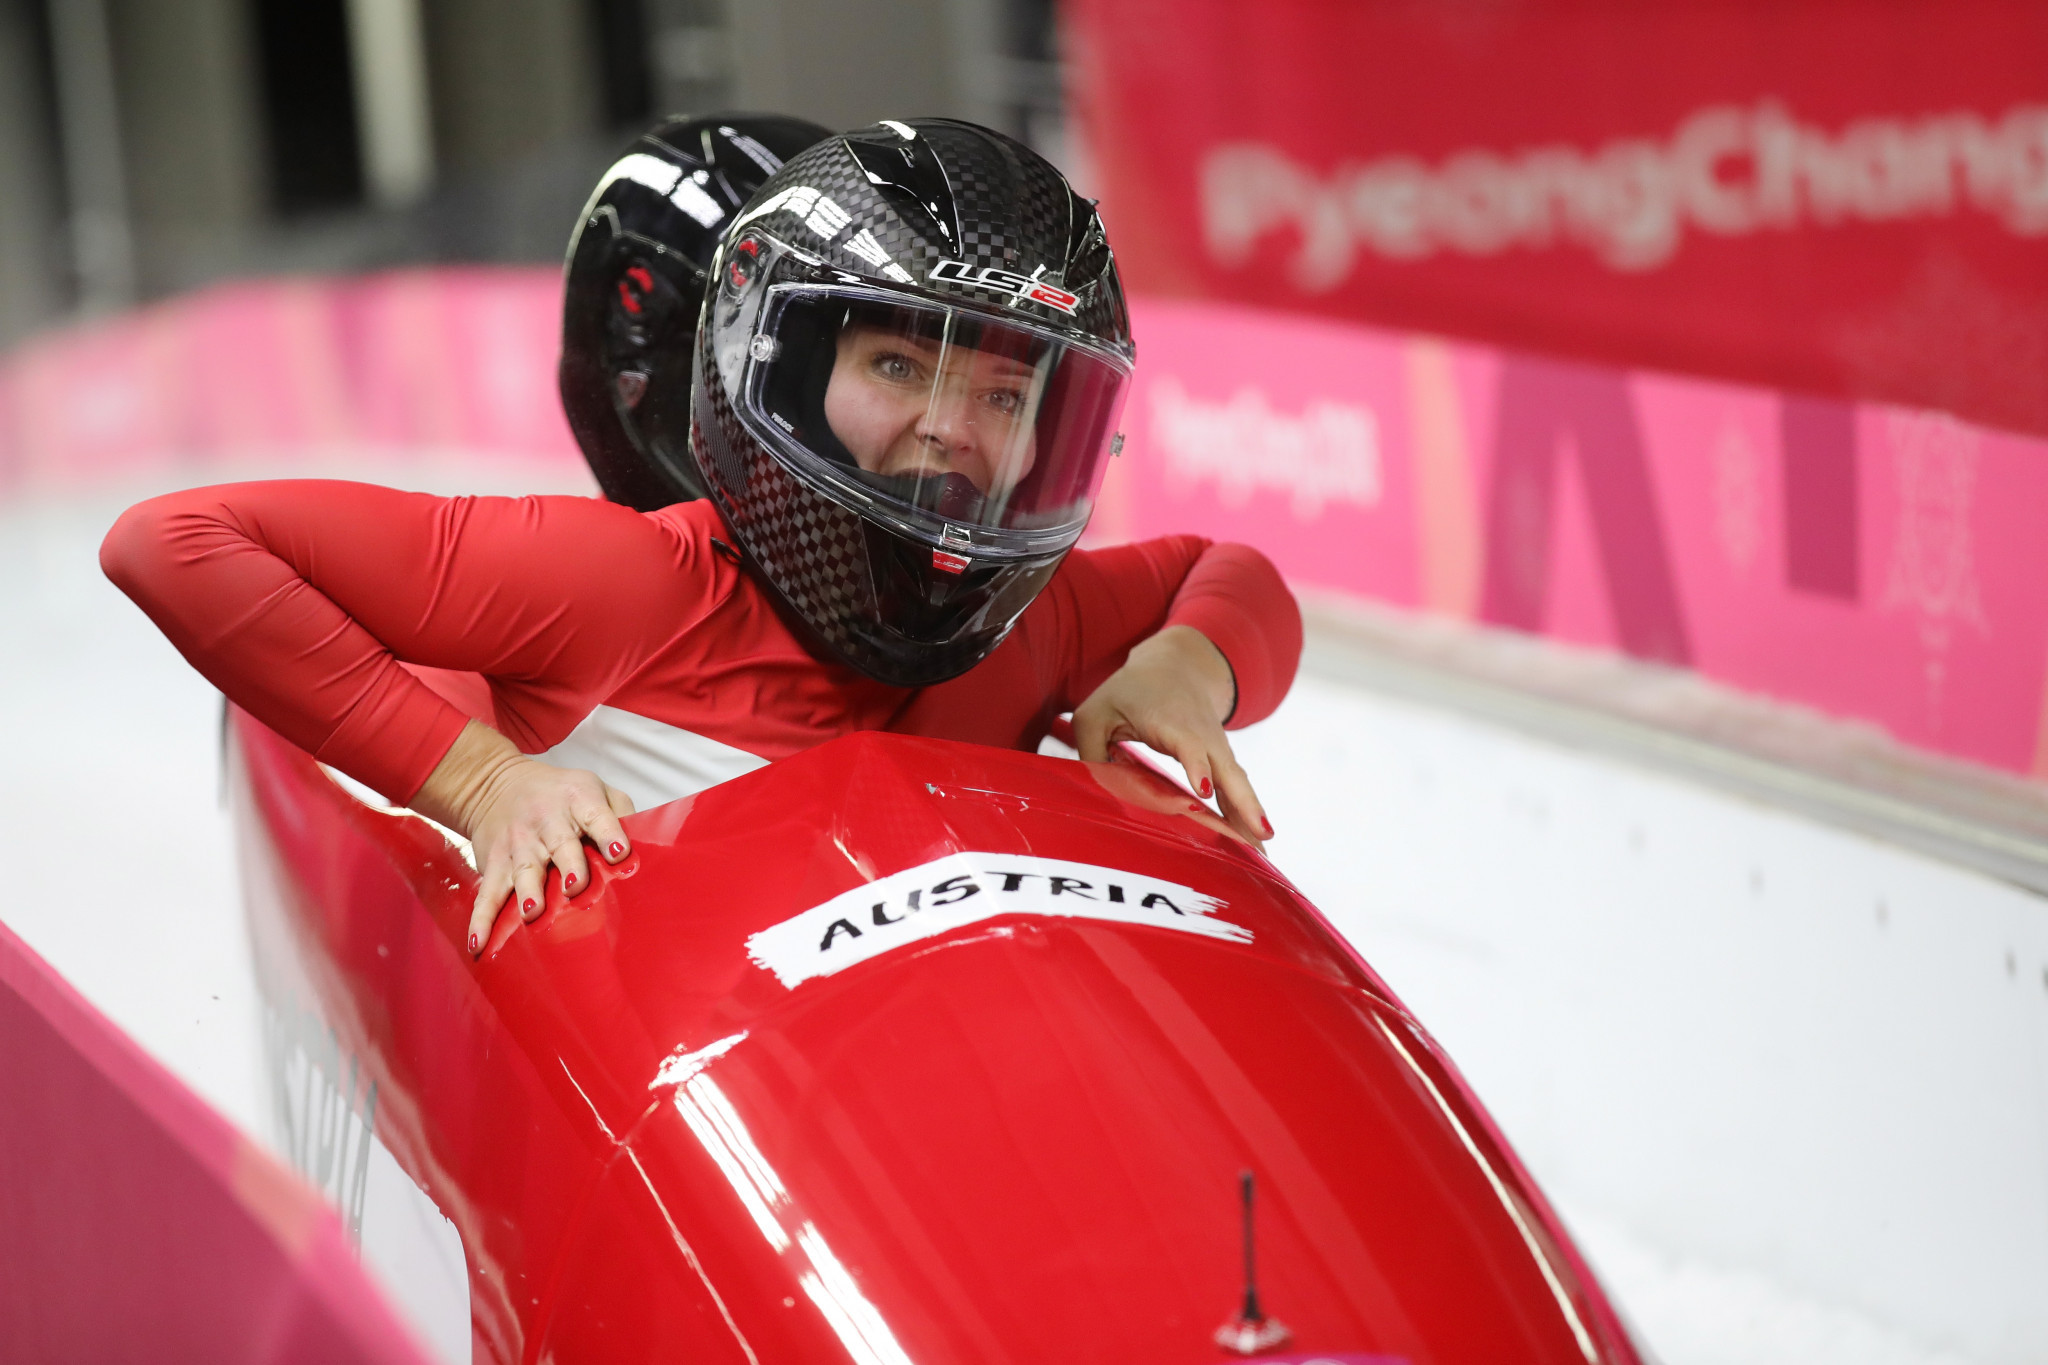 Christina Hengster has retired from bobsleigh ©Getty Images